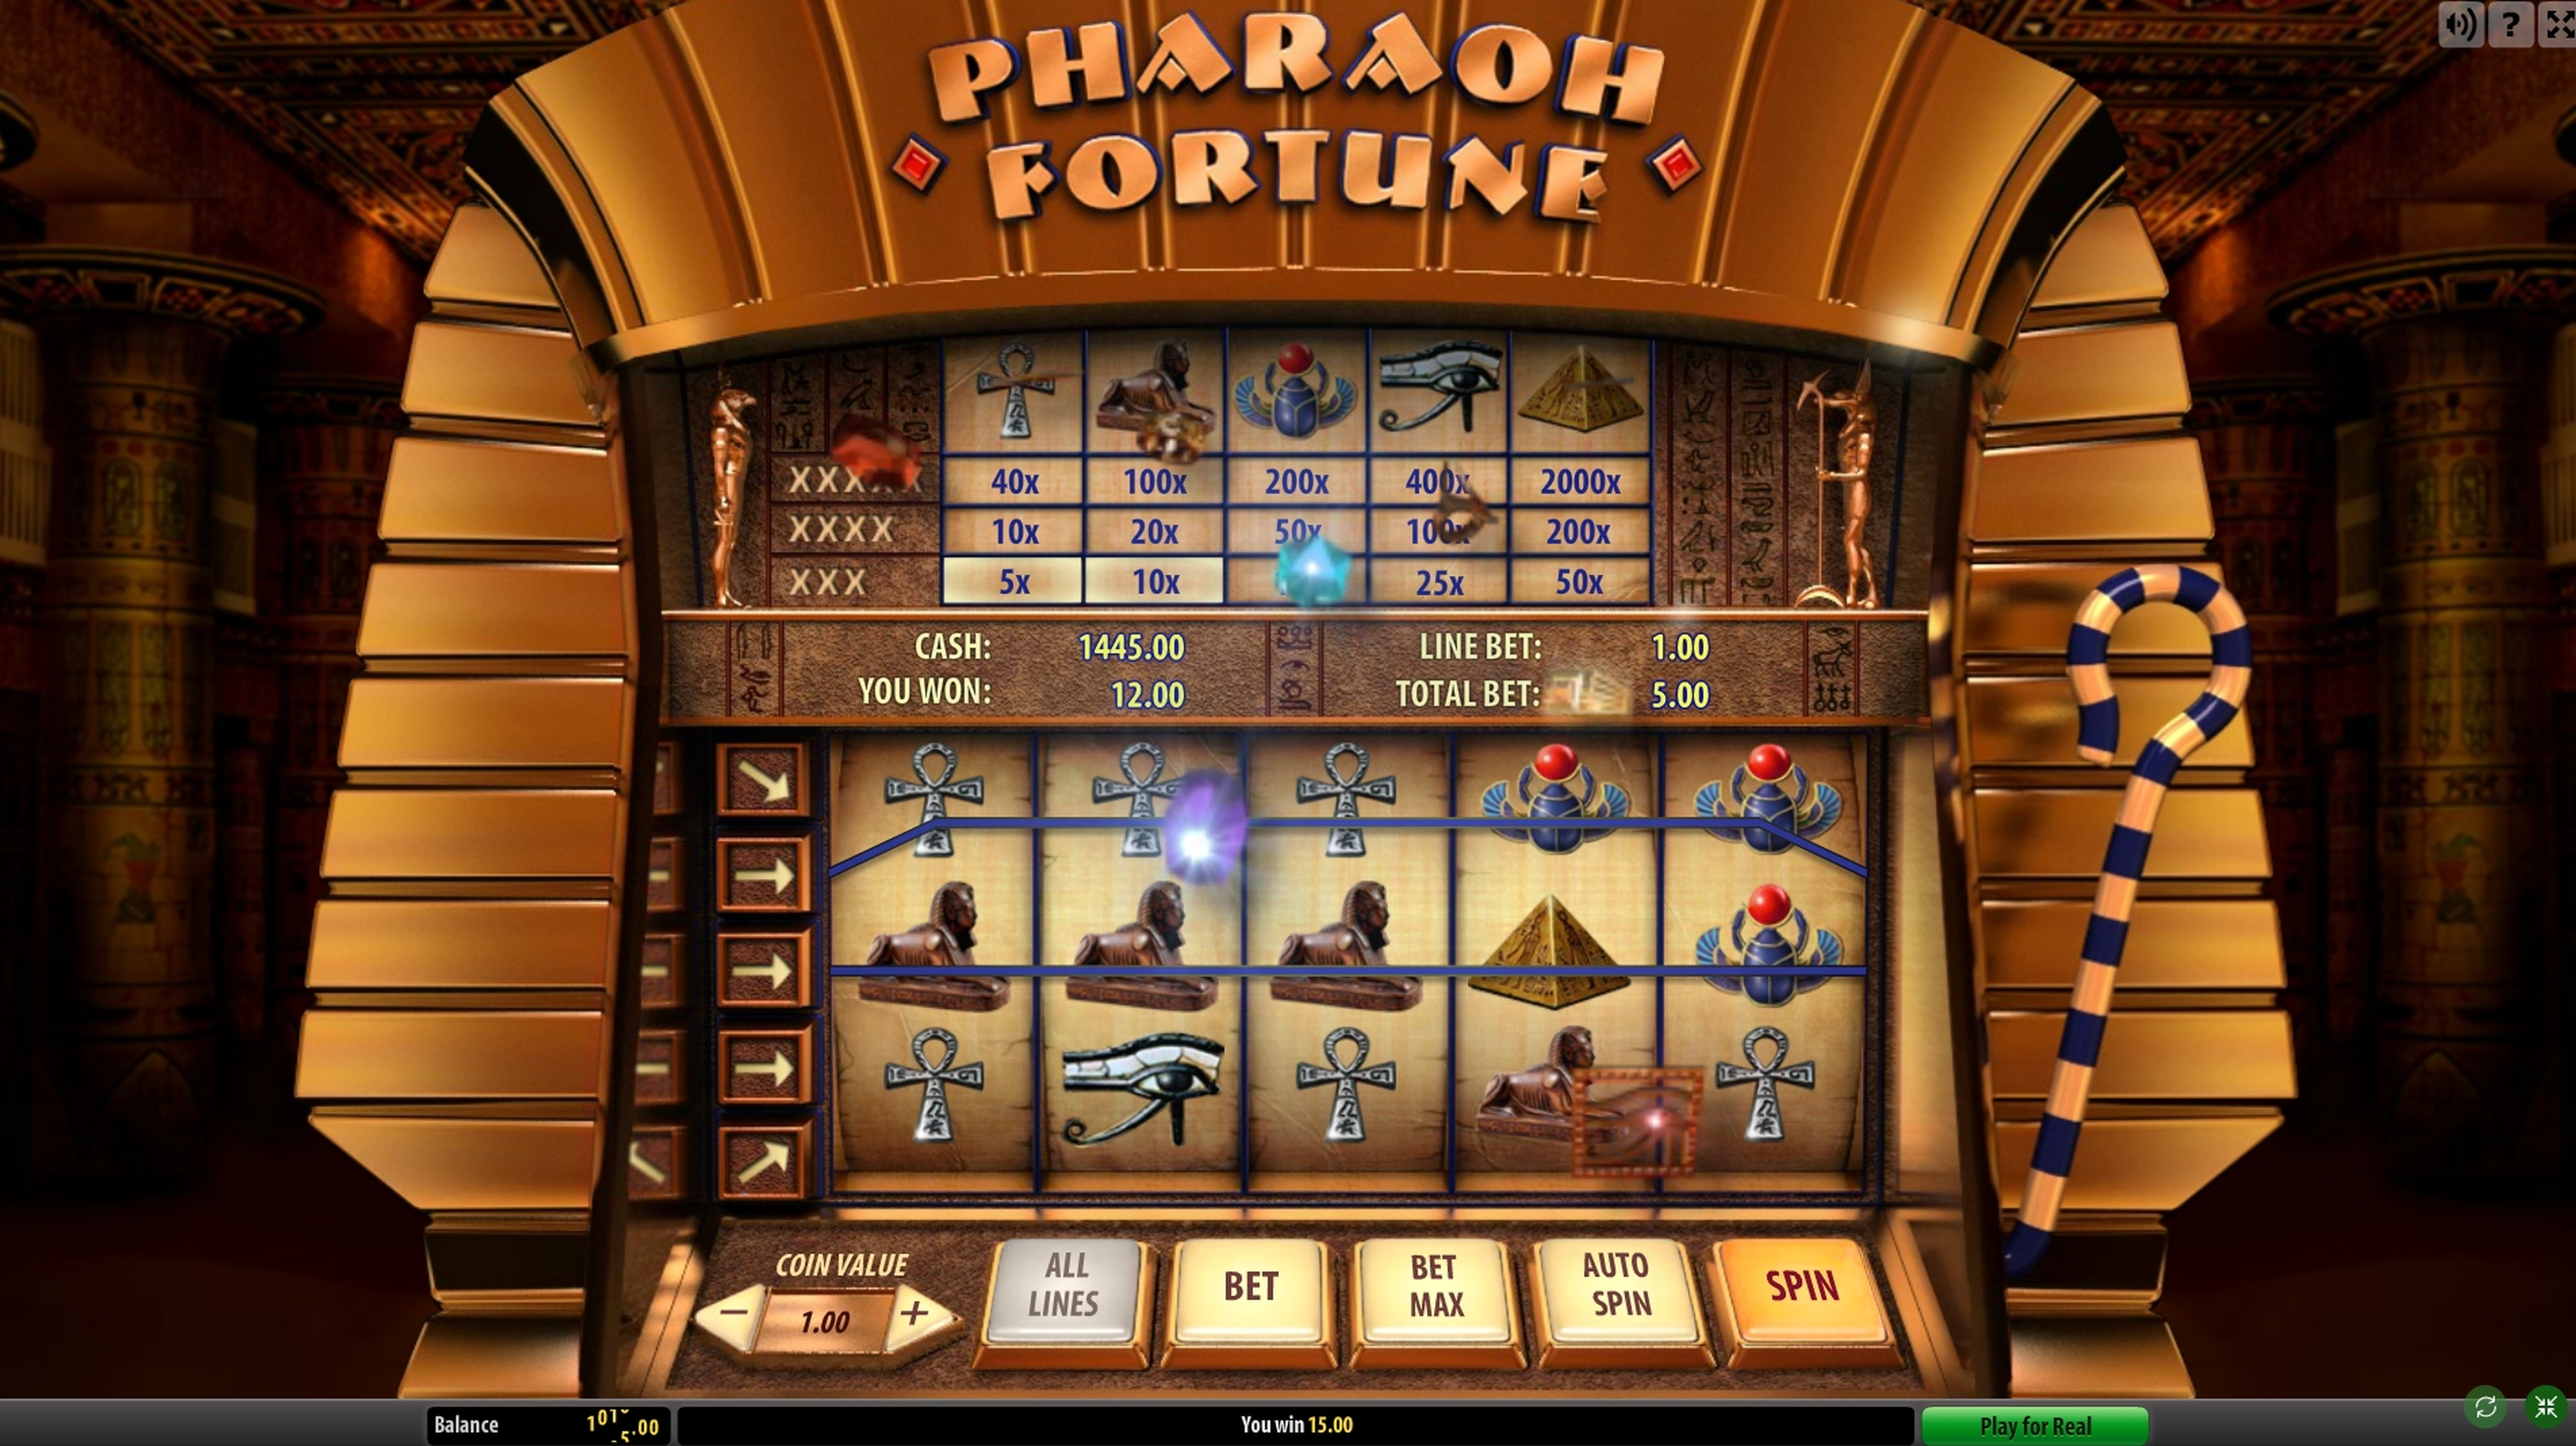 Win Money in Pharaoh Fortune Free Slot Game by Gamescale Software